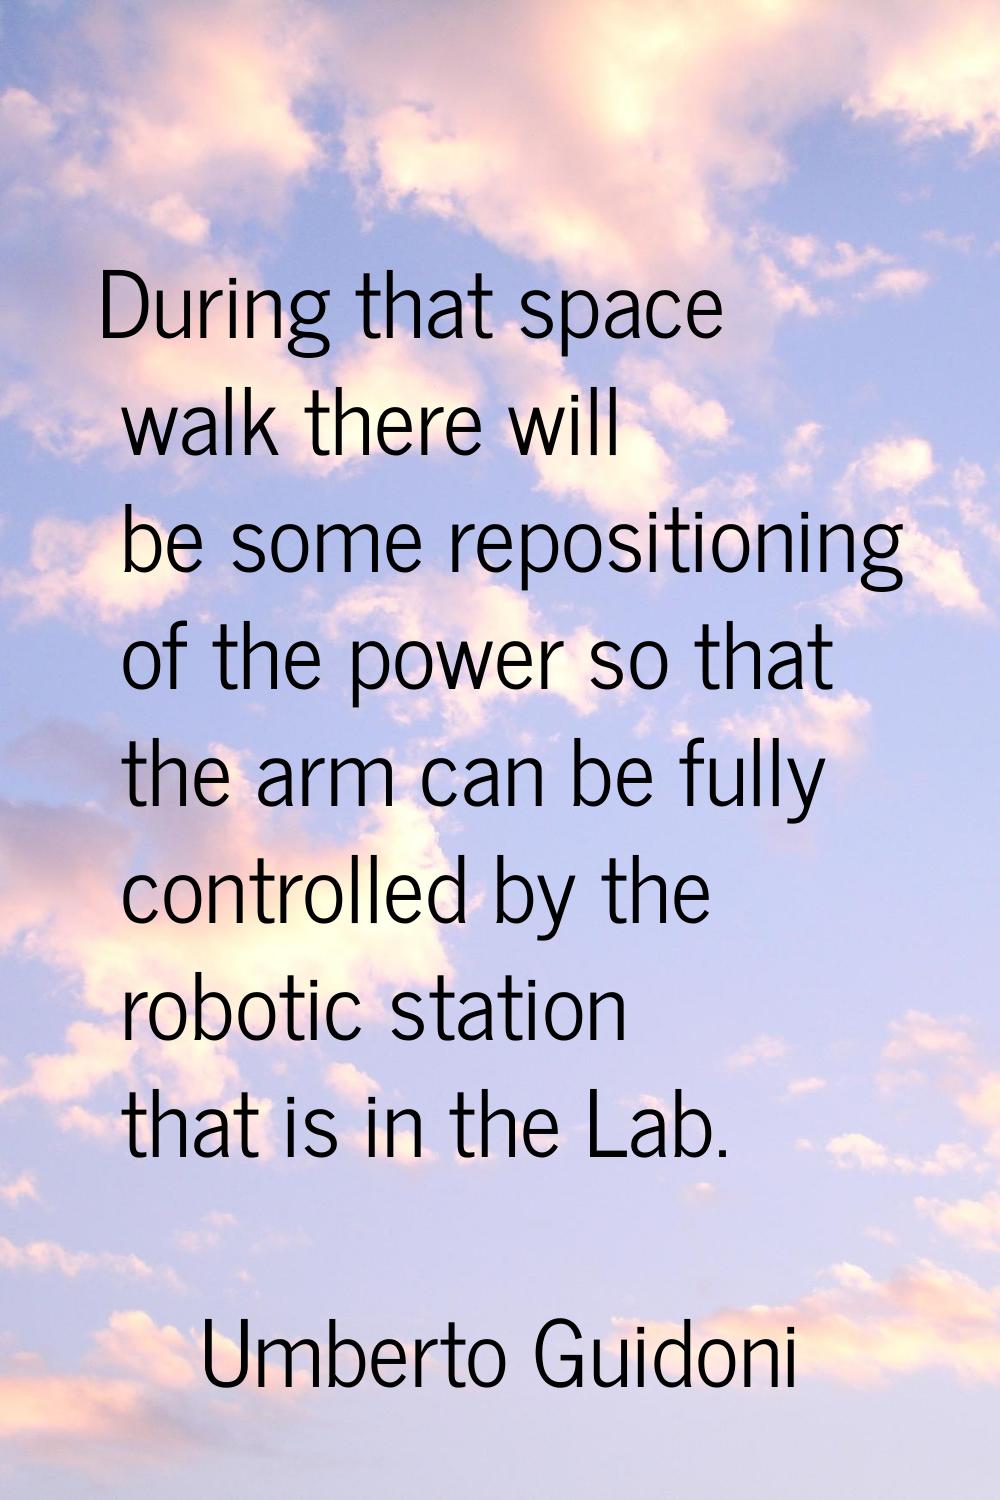 During that space walk there will be some repositioning of the power so that the arm can be fully c